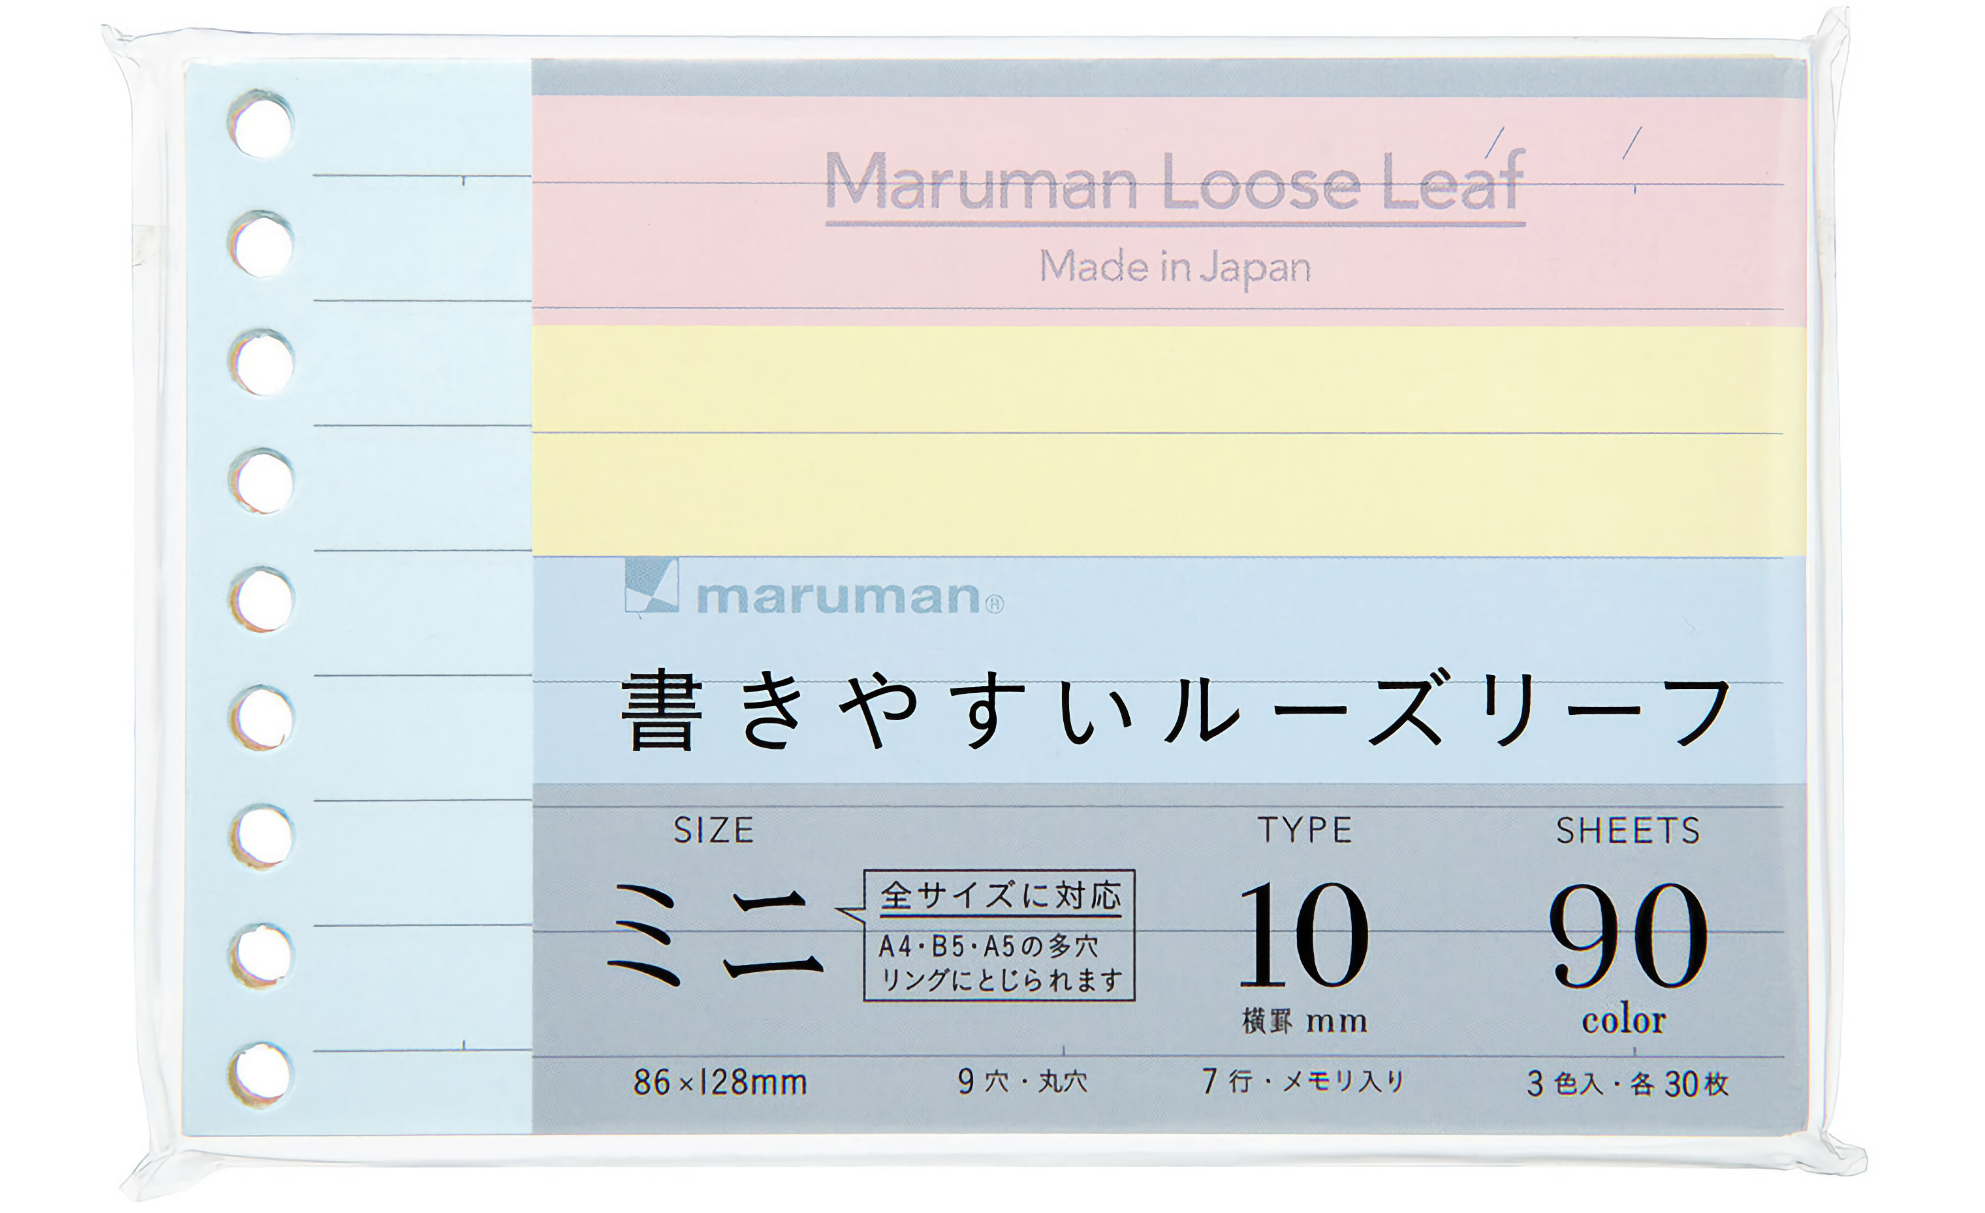 Maruman Loose Leaf Easy to Write Ruled 10 mm 3 Color